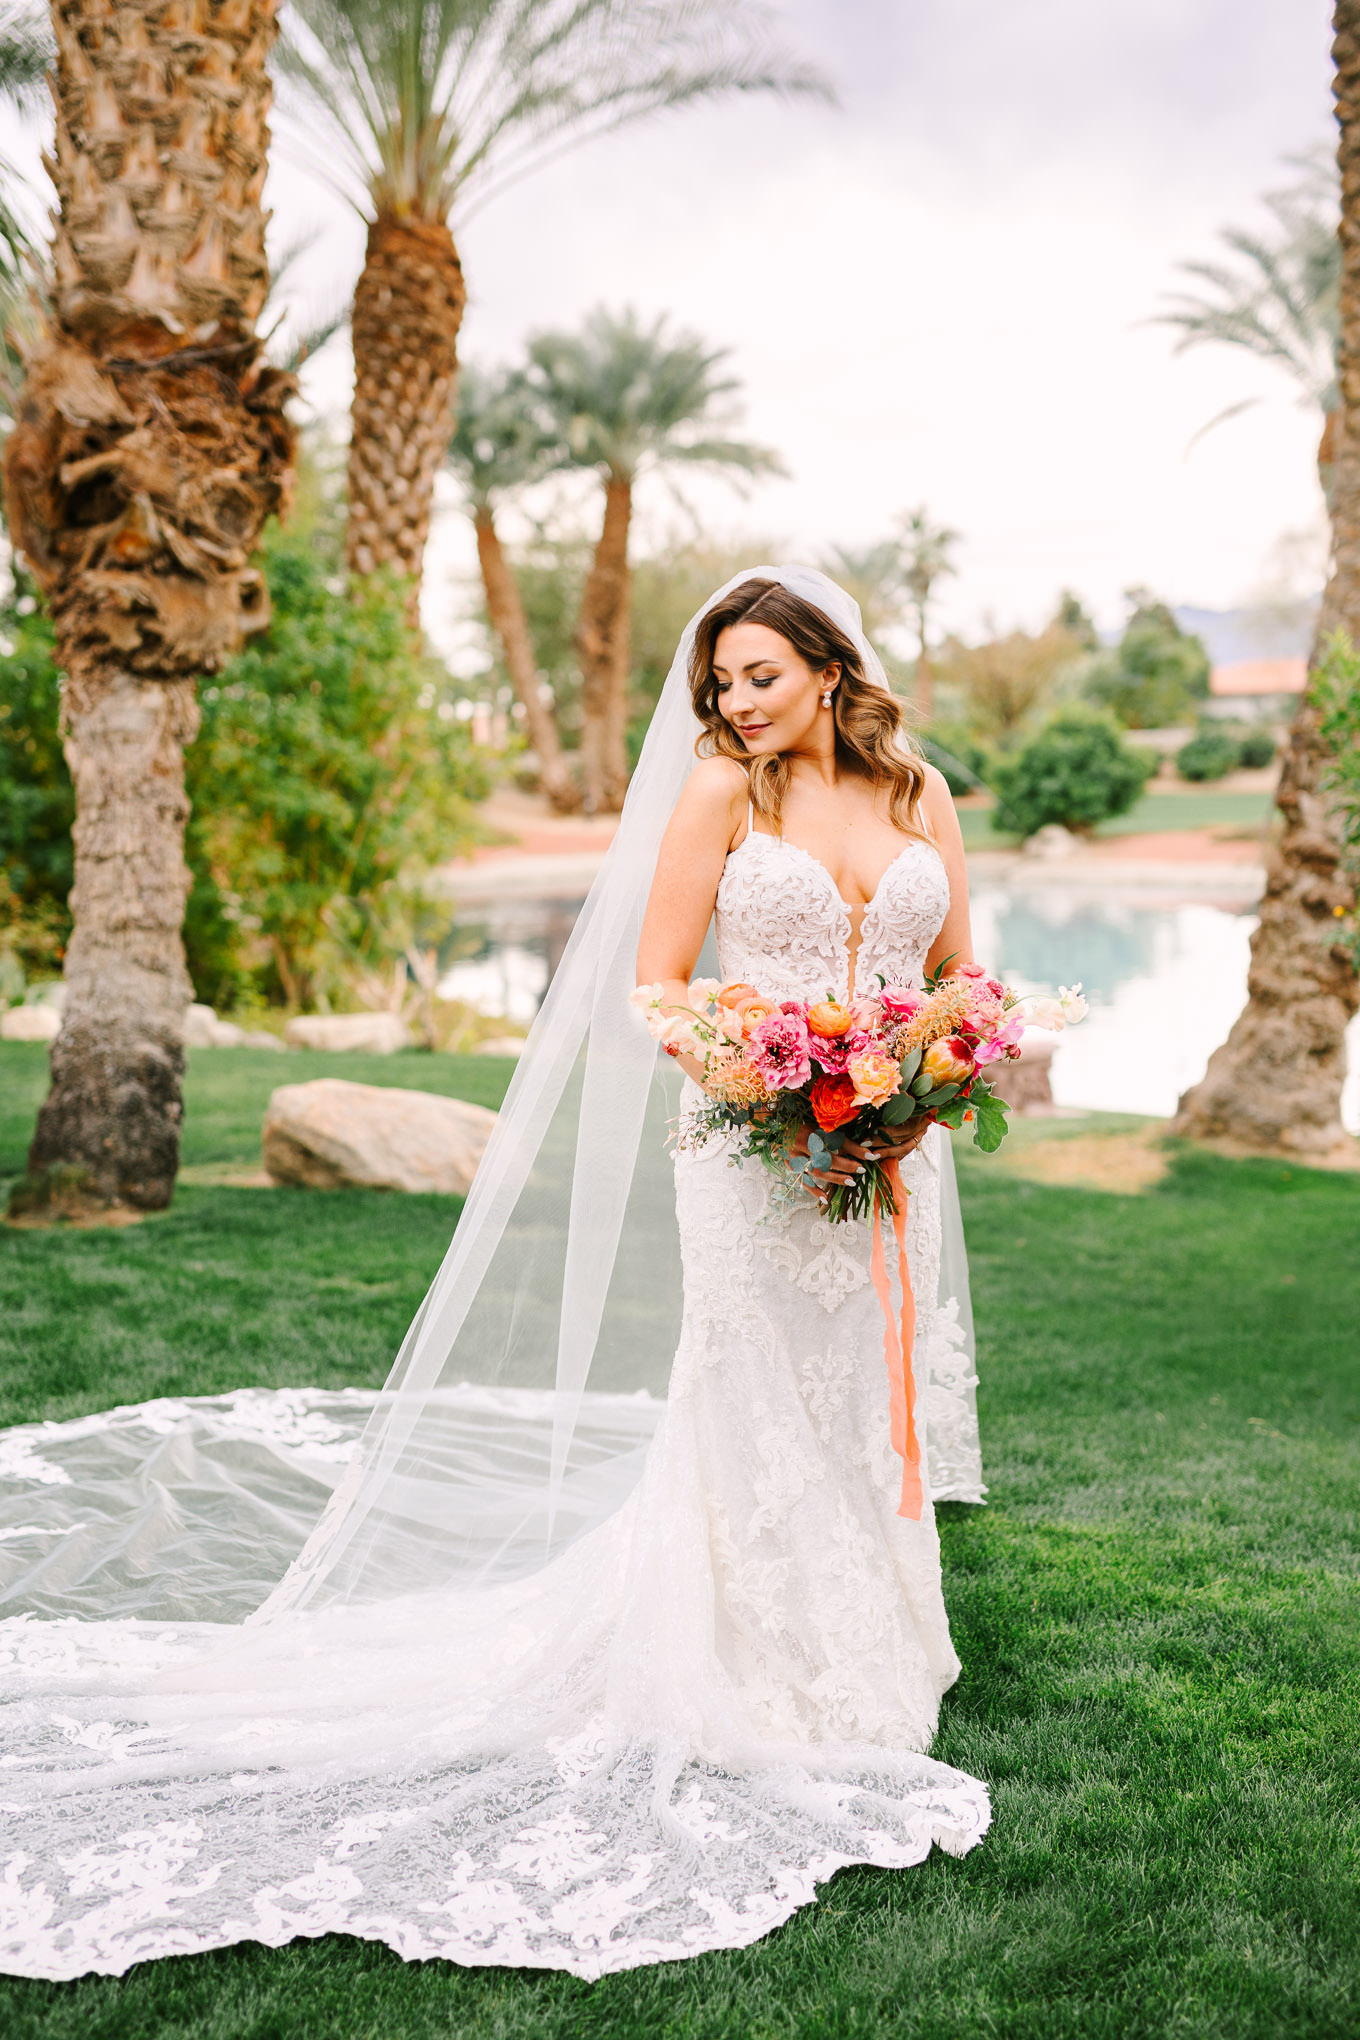 Bougainvillea Estate Palm Springs wedding | Wedding and elopement photography roundup | Los Angeles and Palm Springs photographer | #losangeleswedding #palmspringswedding #elopementphotographer Source: Mary Costa Photography | Los Angeles